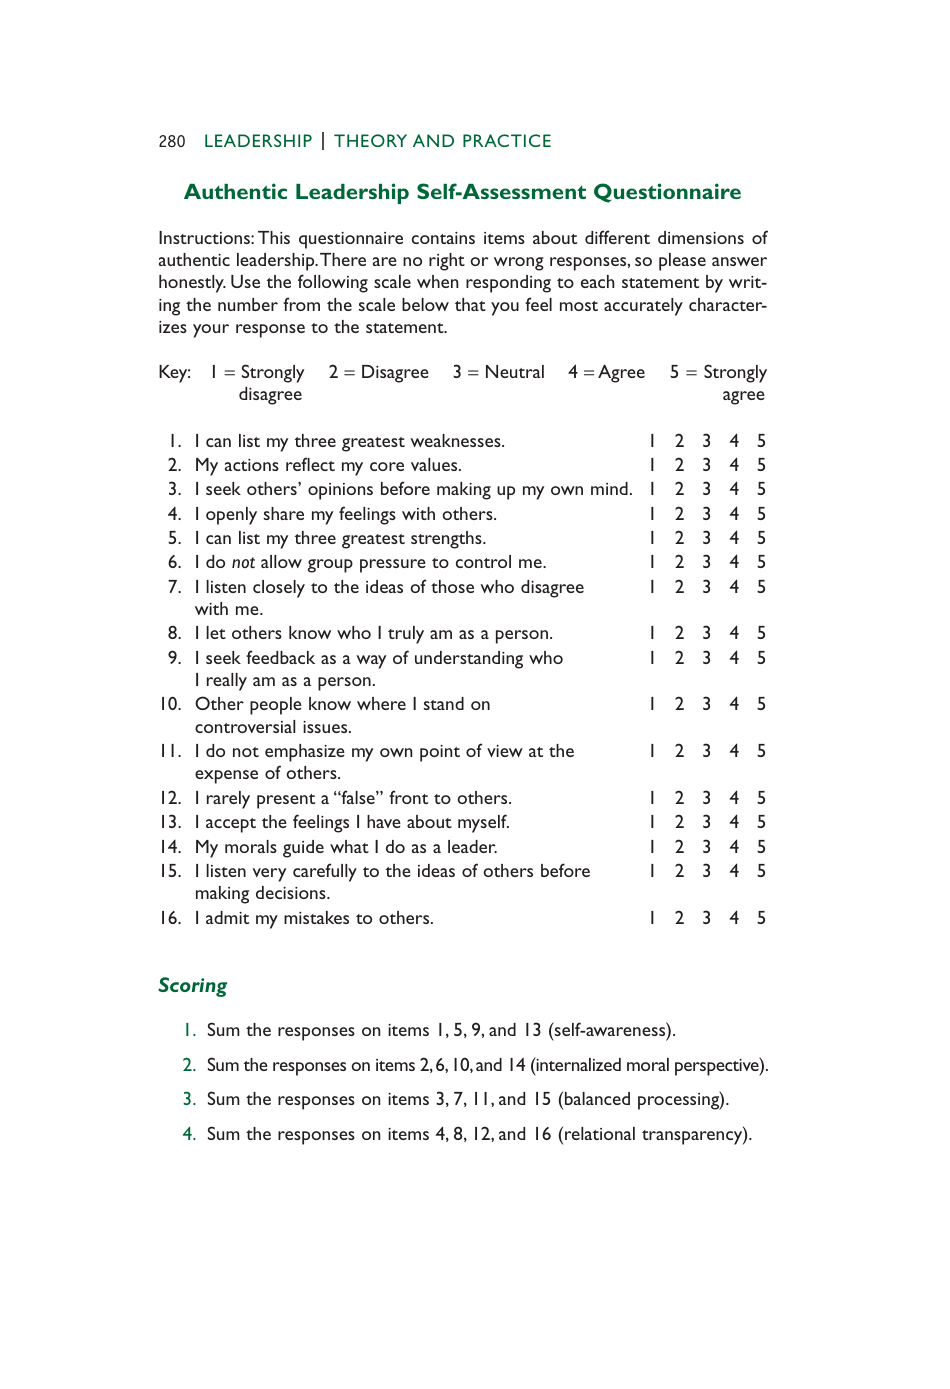 Authentic Leadership Self-assessment Questionnaire Form, Page 1